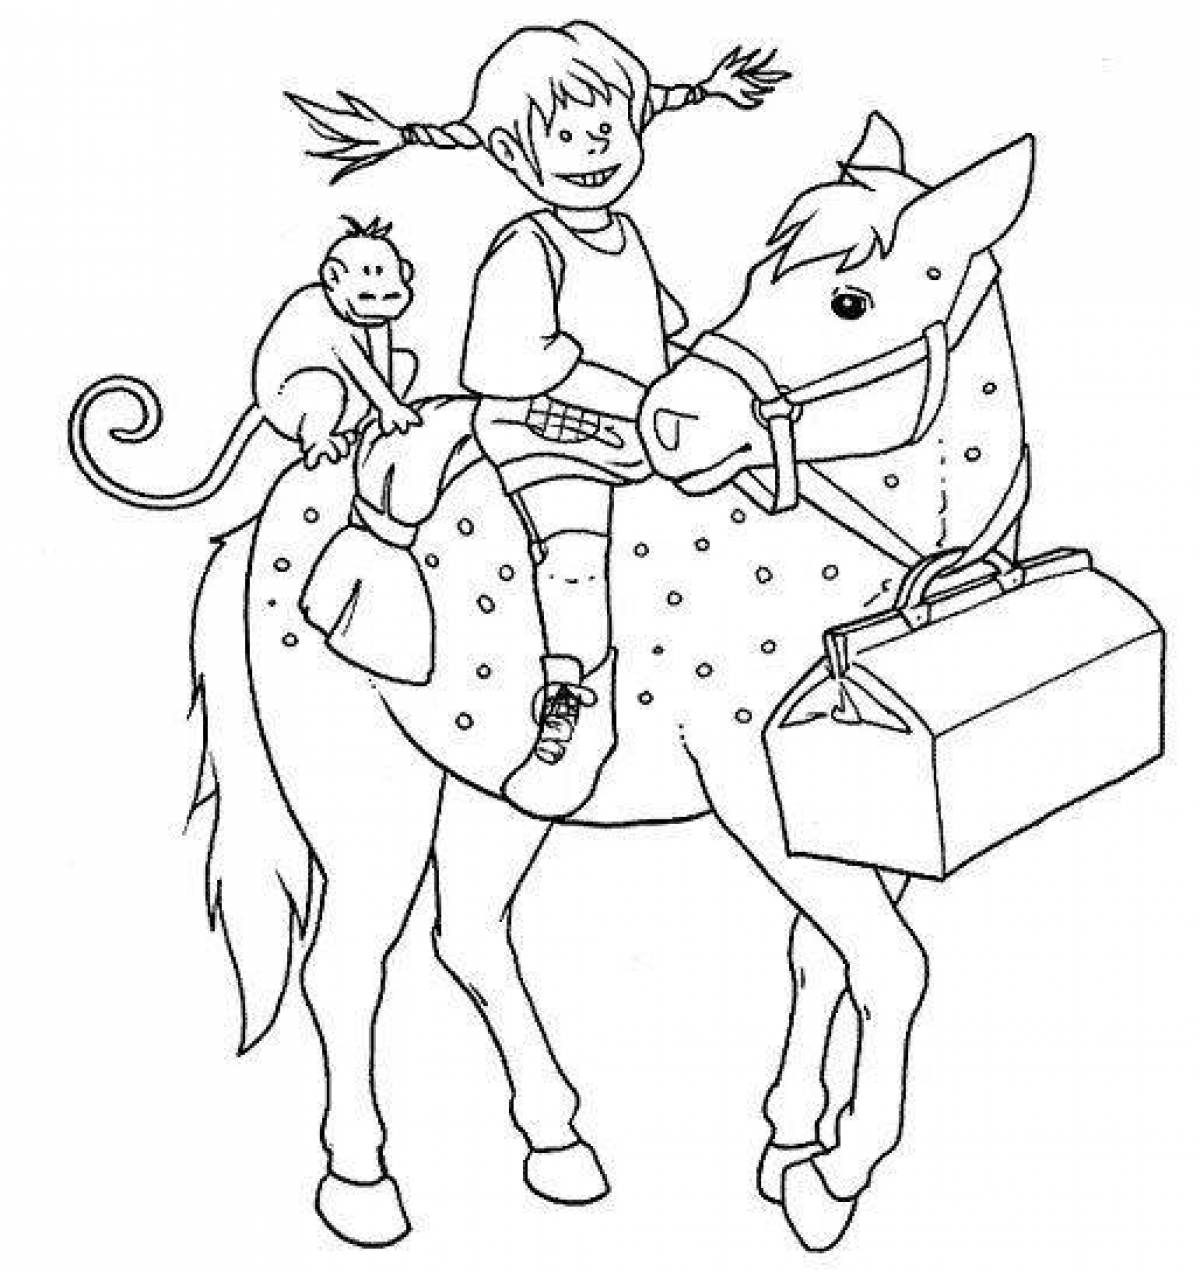 Coloring page nice pippi longstocking